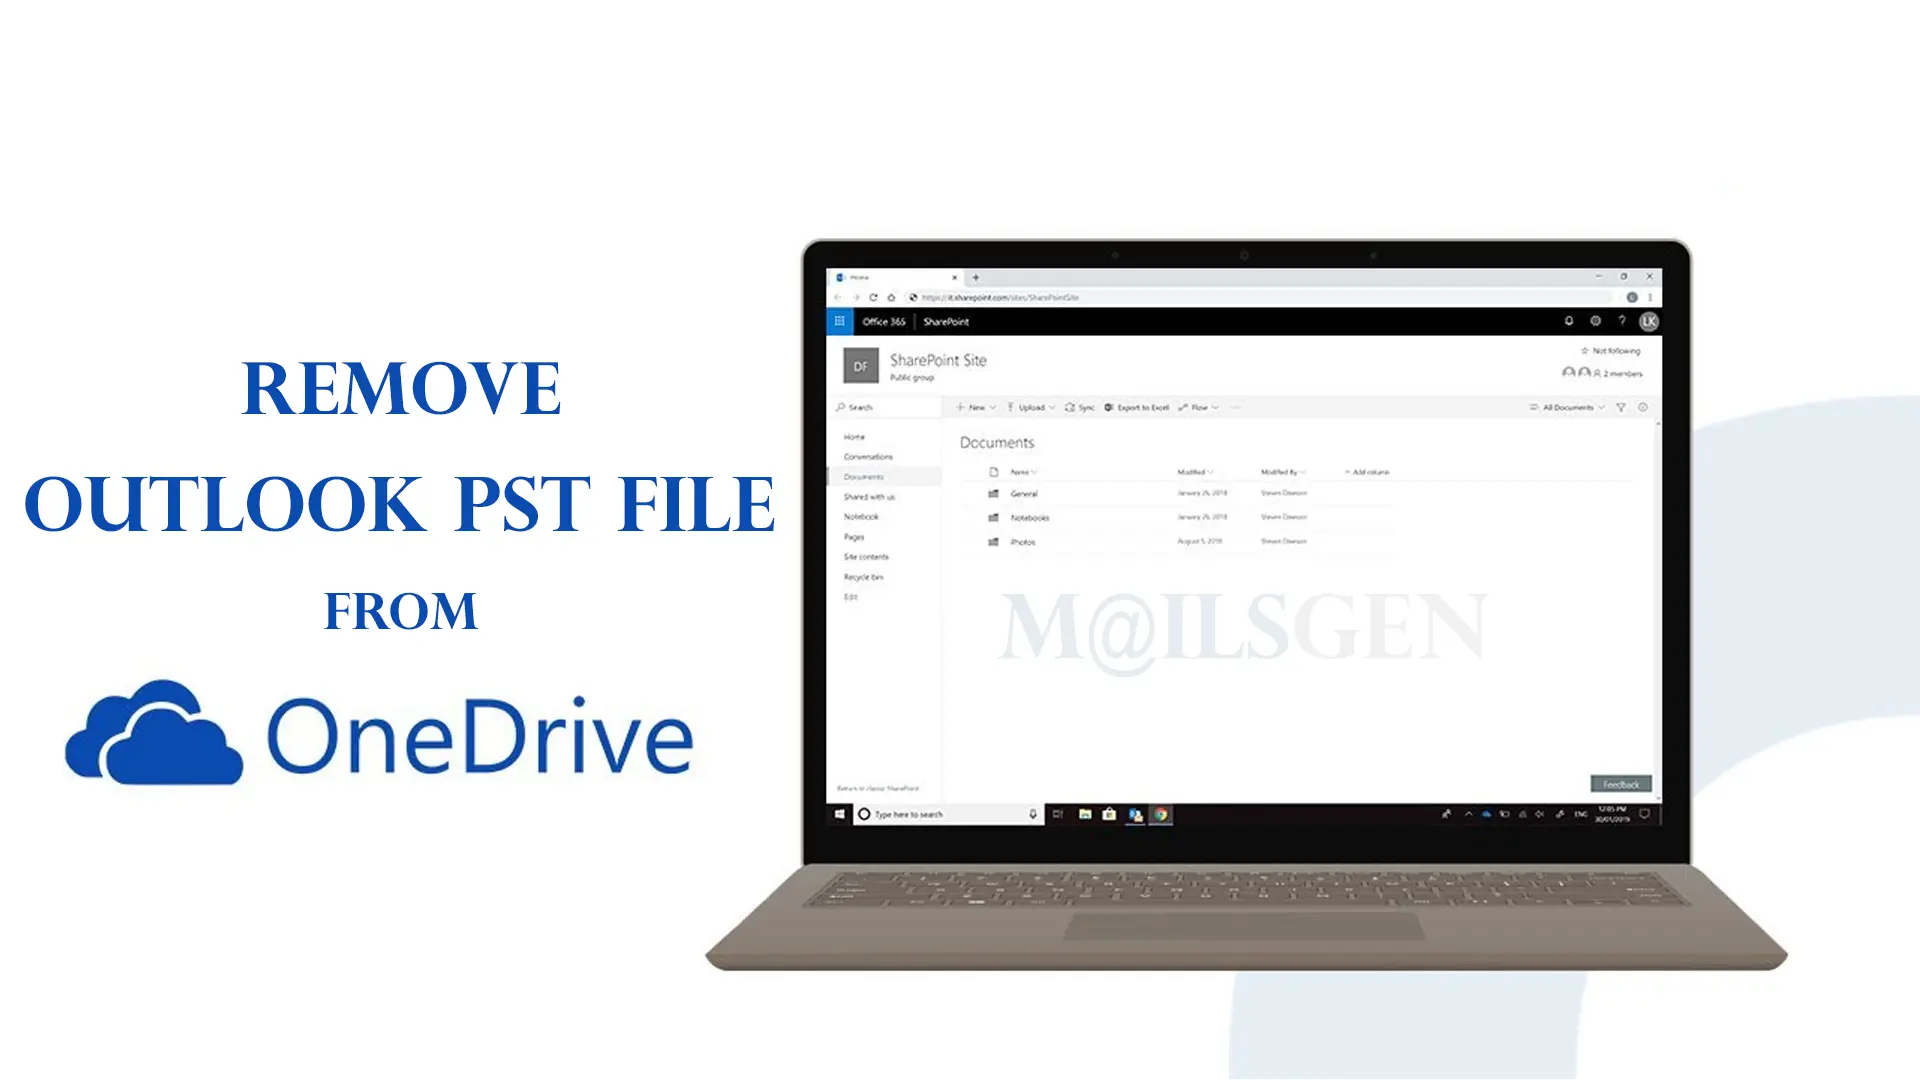 How to Remove Outlook PST file From OneDrive? – Explained